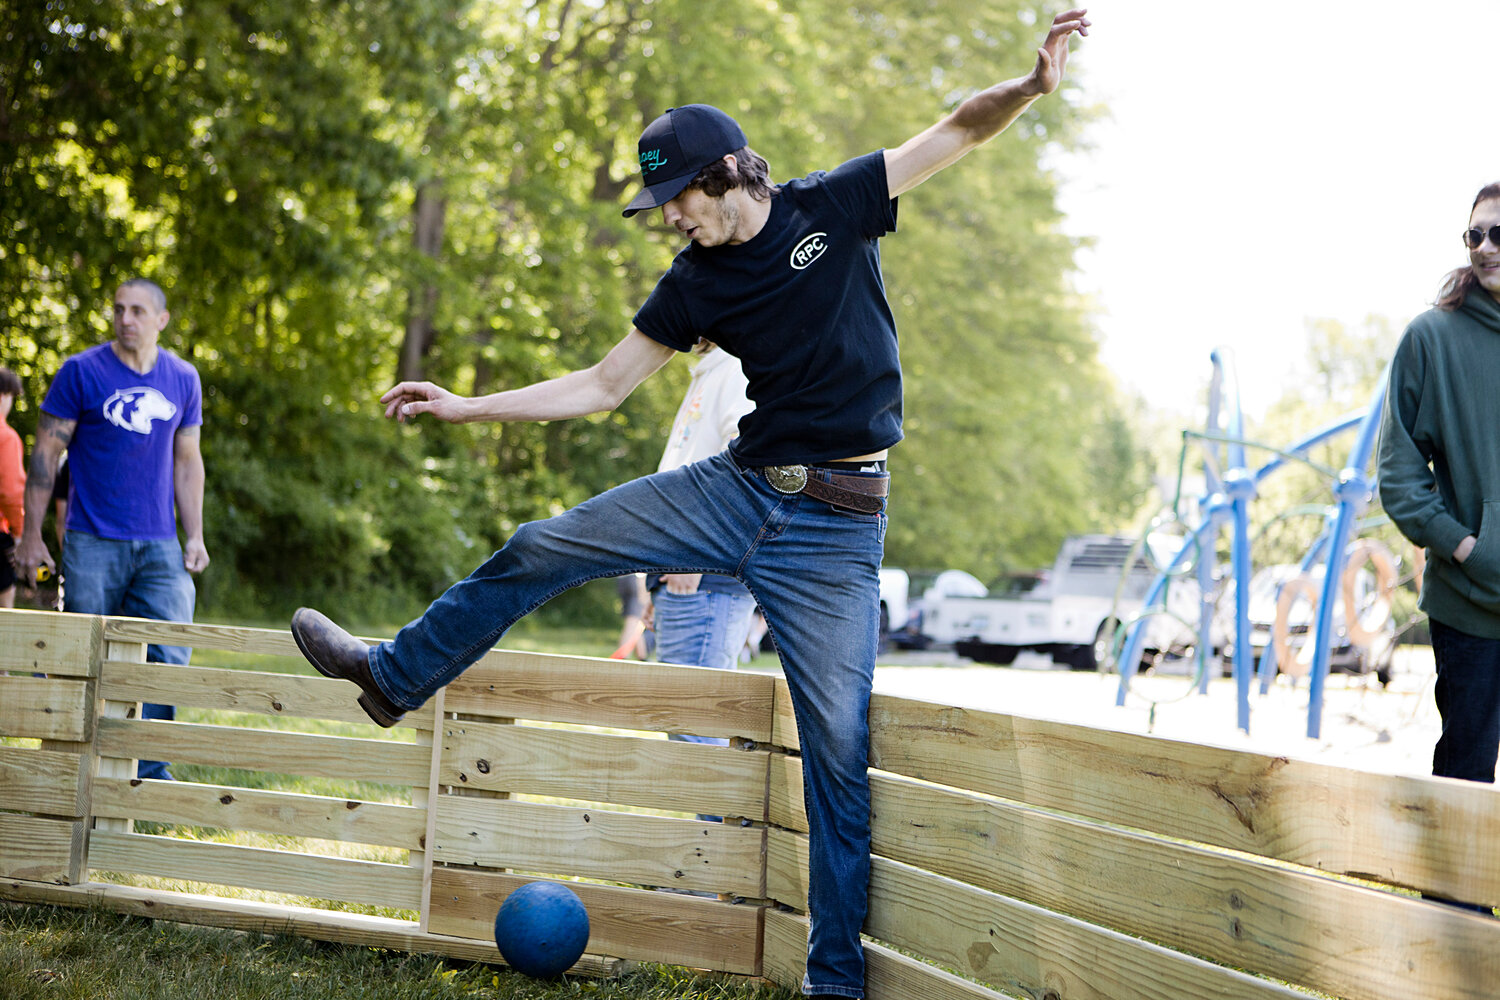 Nate Evans leaps over a ball while trying out the new Gaga Pit.